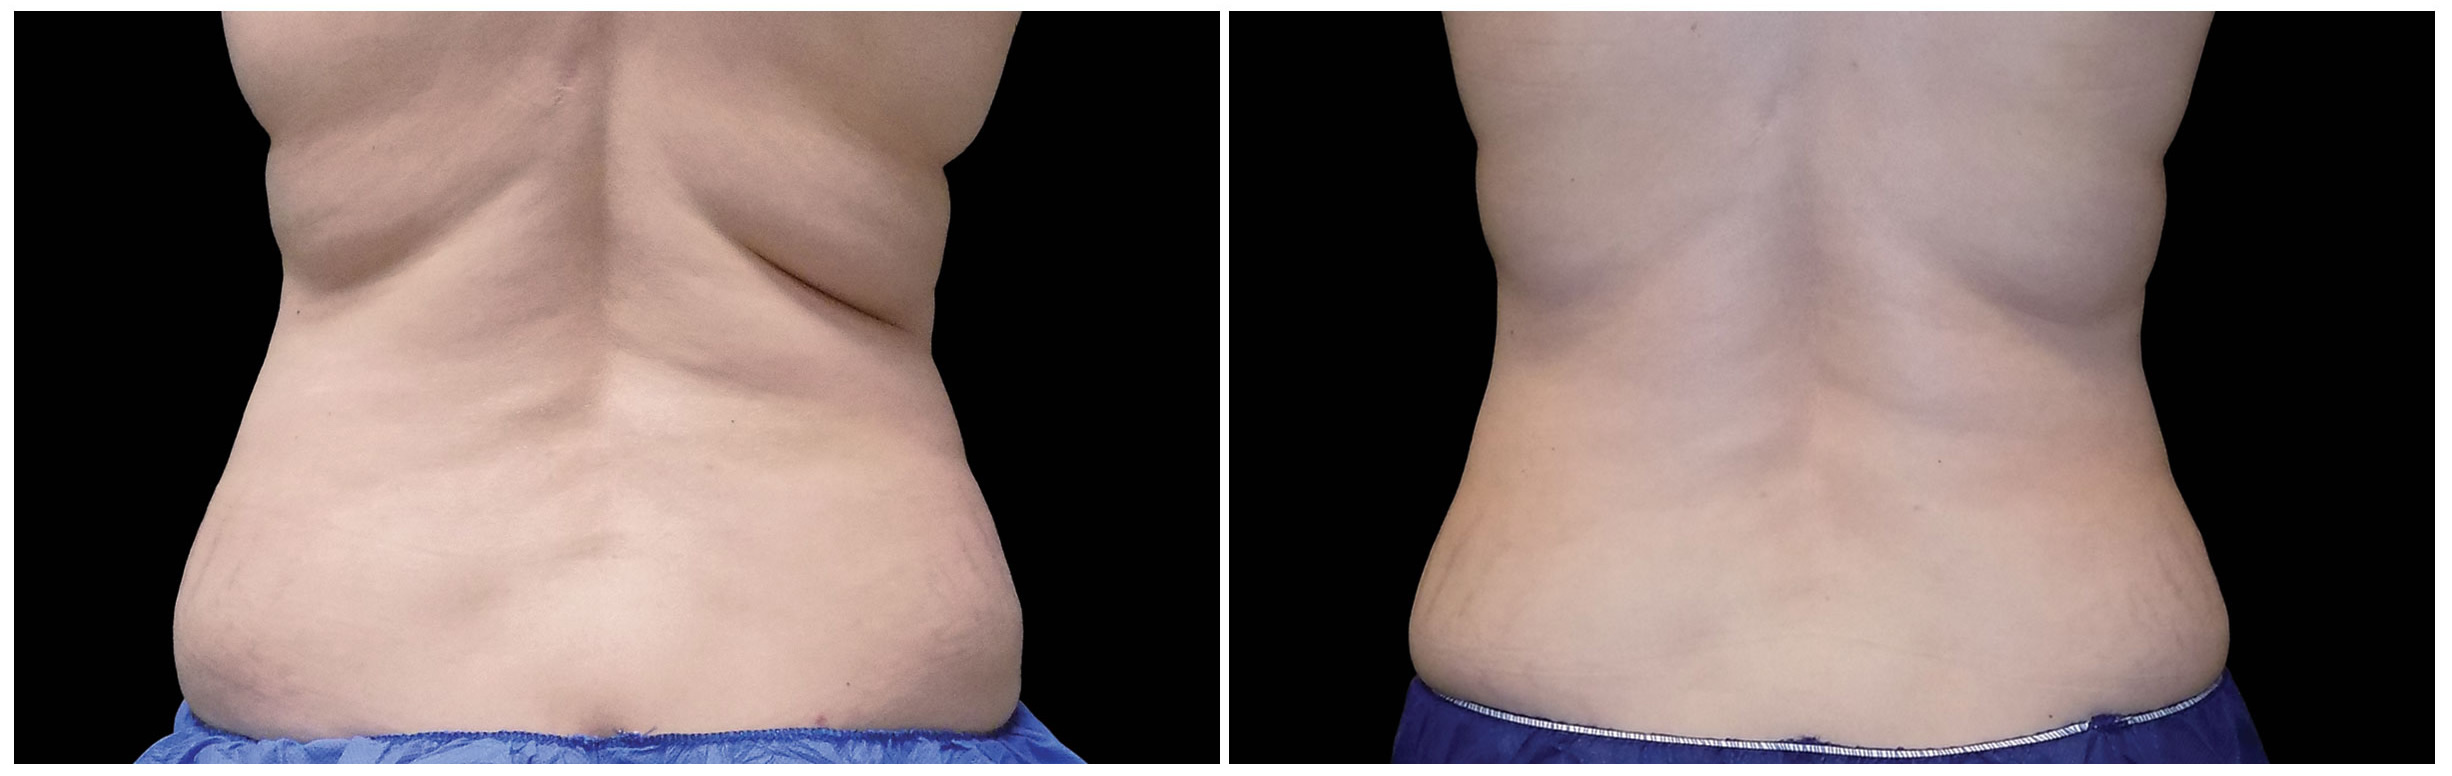 How to Get Rid of Back Fat with CoolSculpting - The Cosmetic Skin